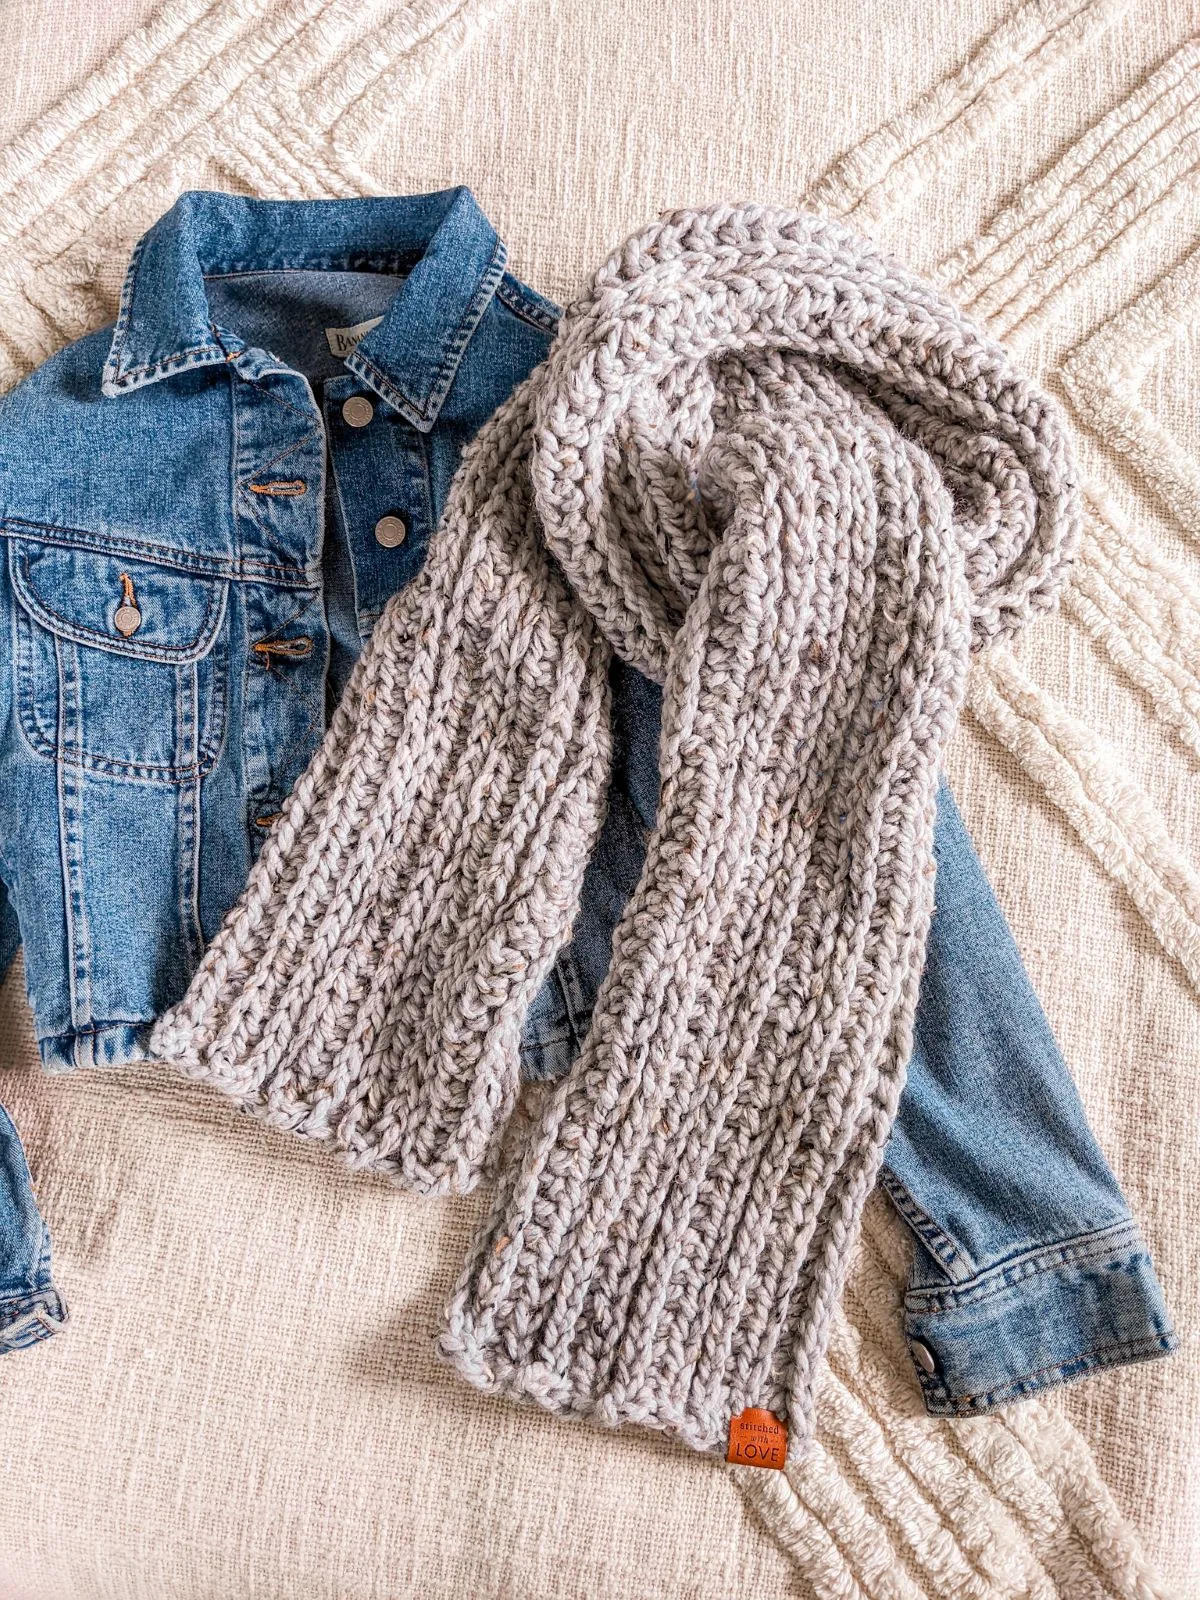 A crochet scarf with a jeans jacket.